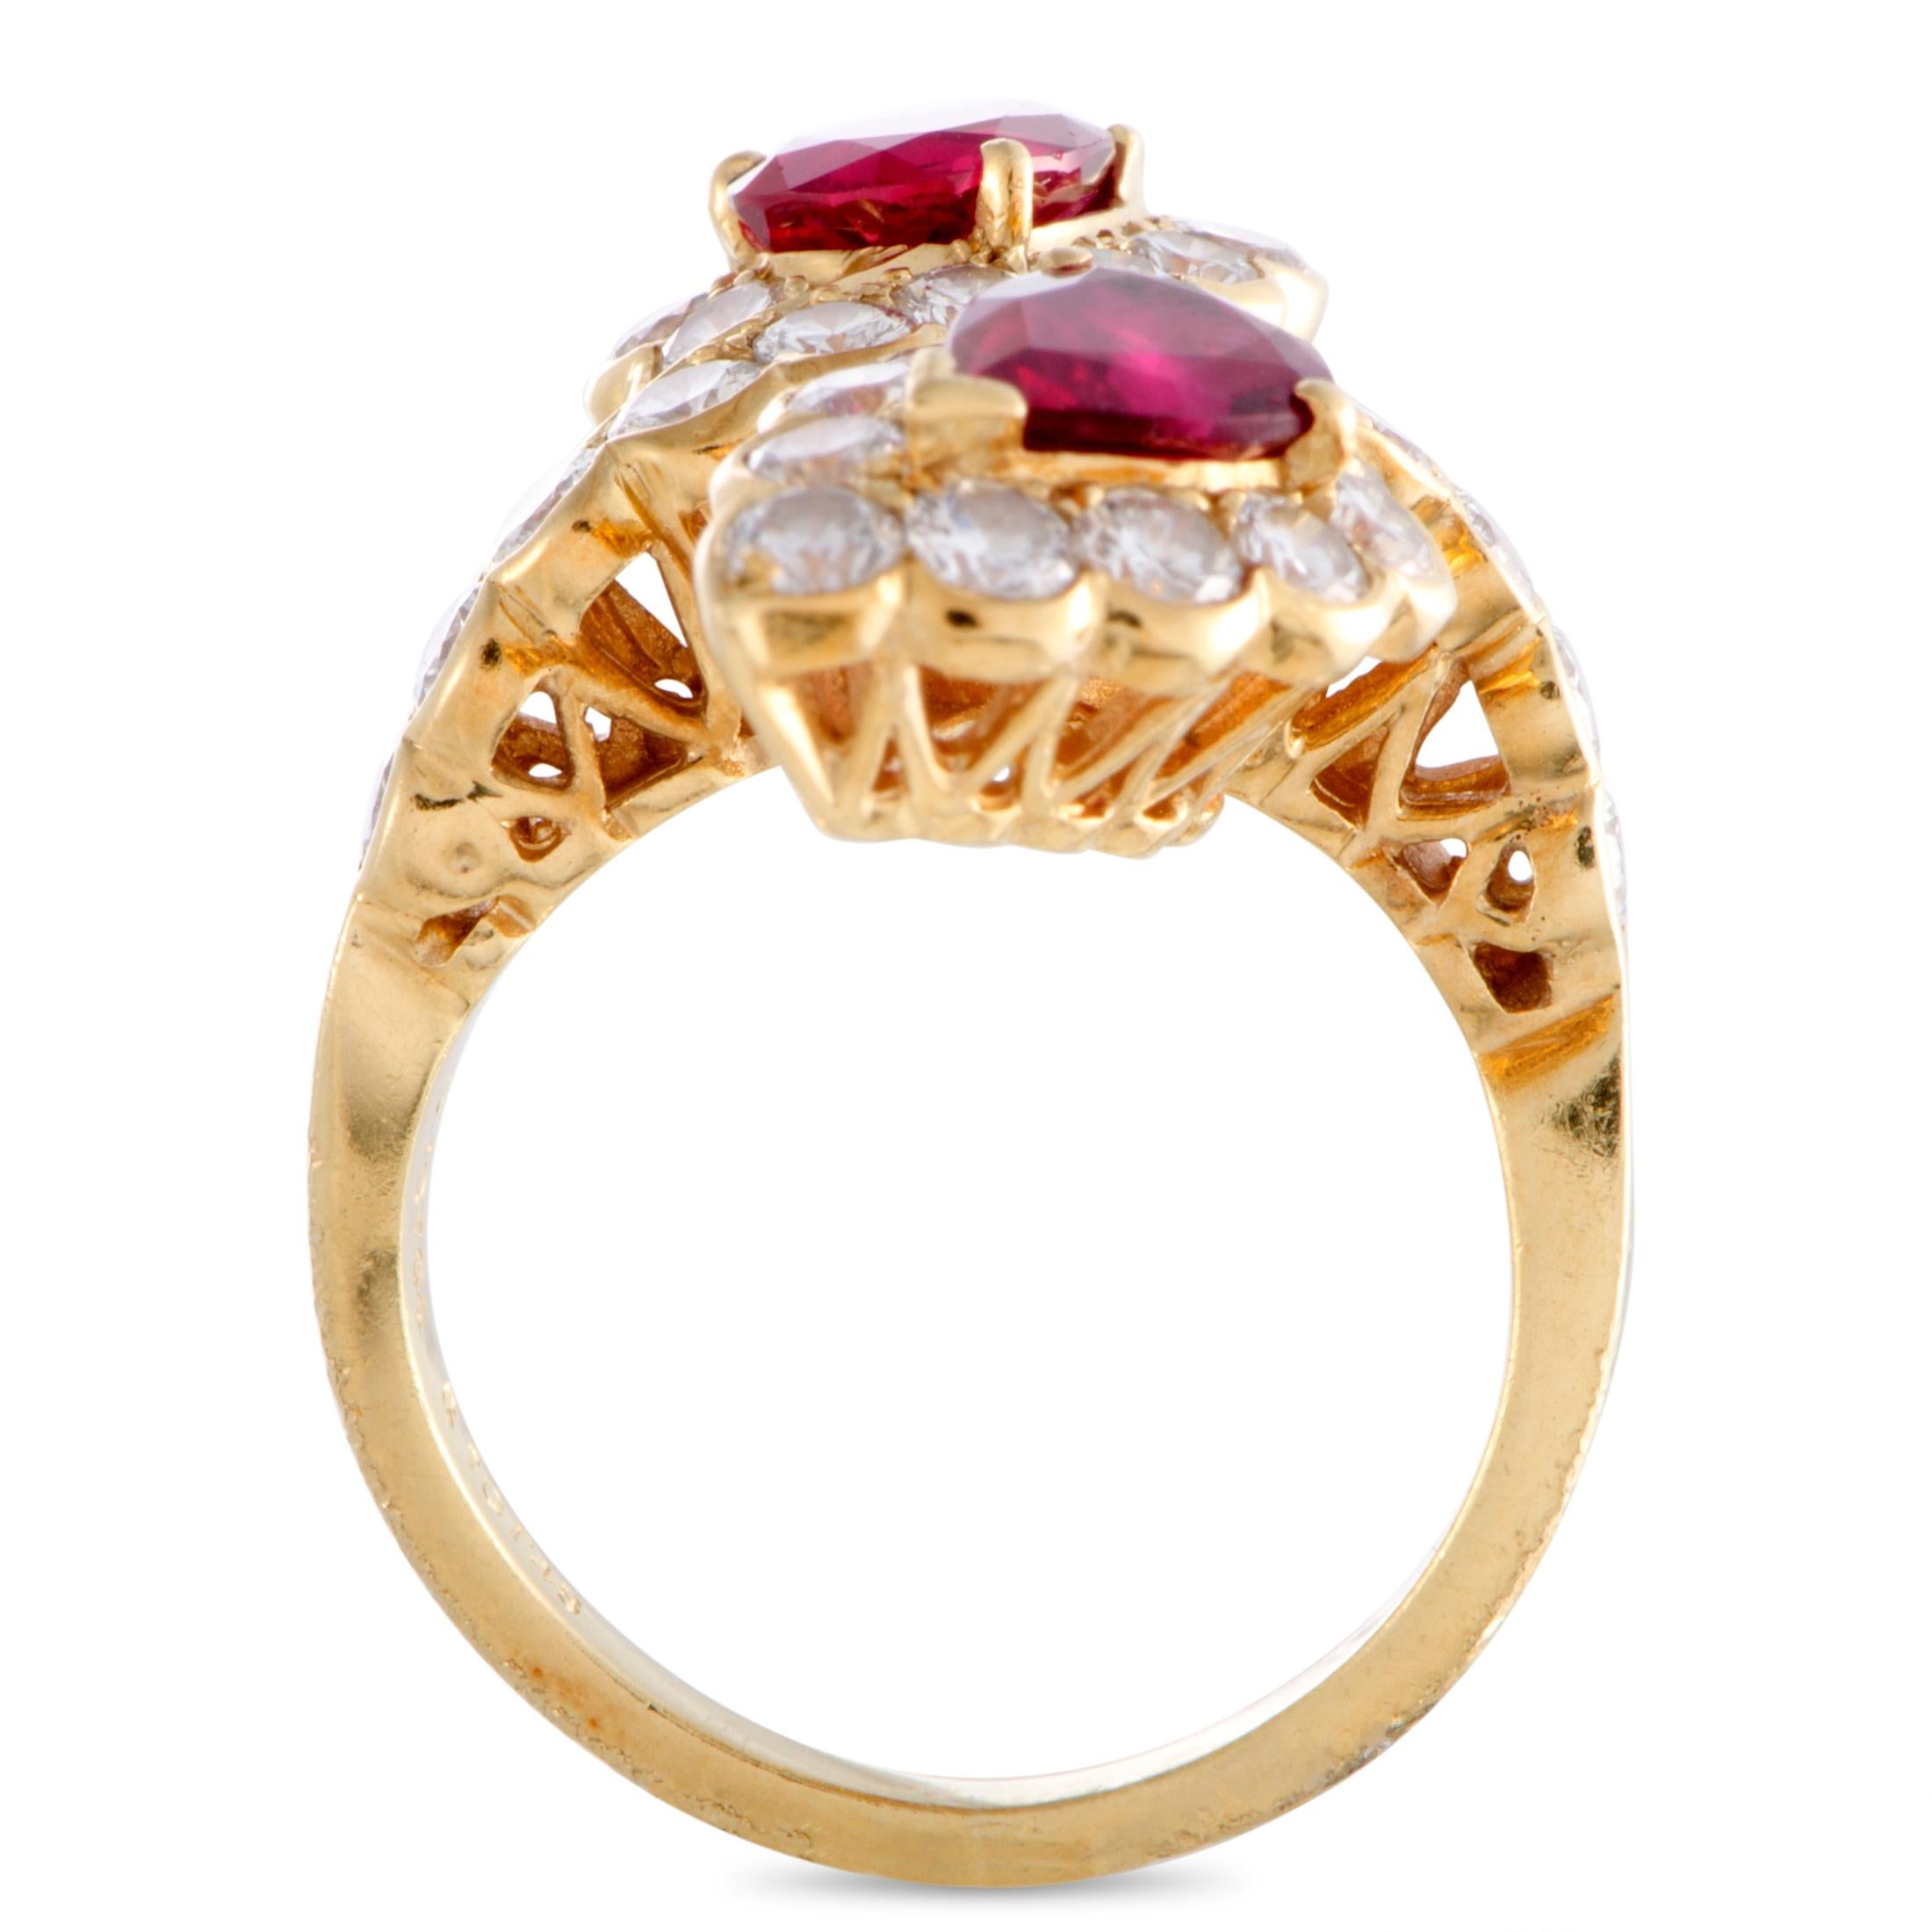 A splendid design is beautifully presented in radiant 18K yellow gold in this magnificent ring from Van Cleef & Arpels that will add a luxurious touch to any ensemble of yours. The ring is embellished with a total of 1.64 carats of diamonds and with